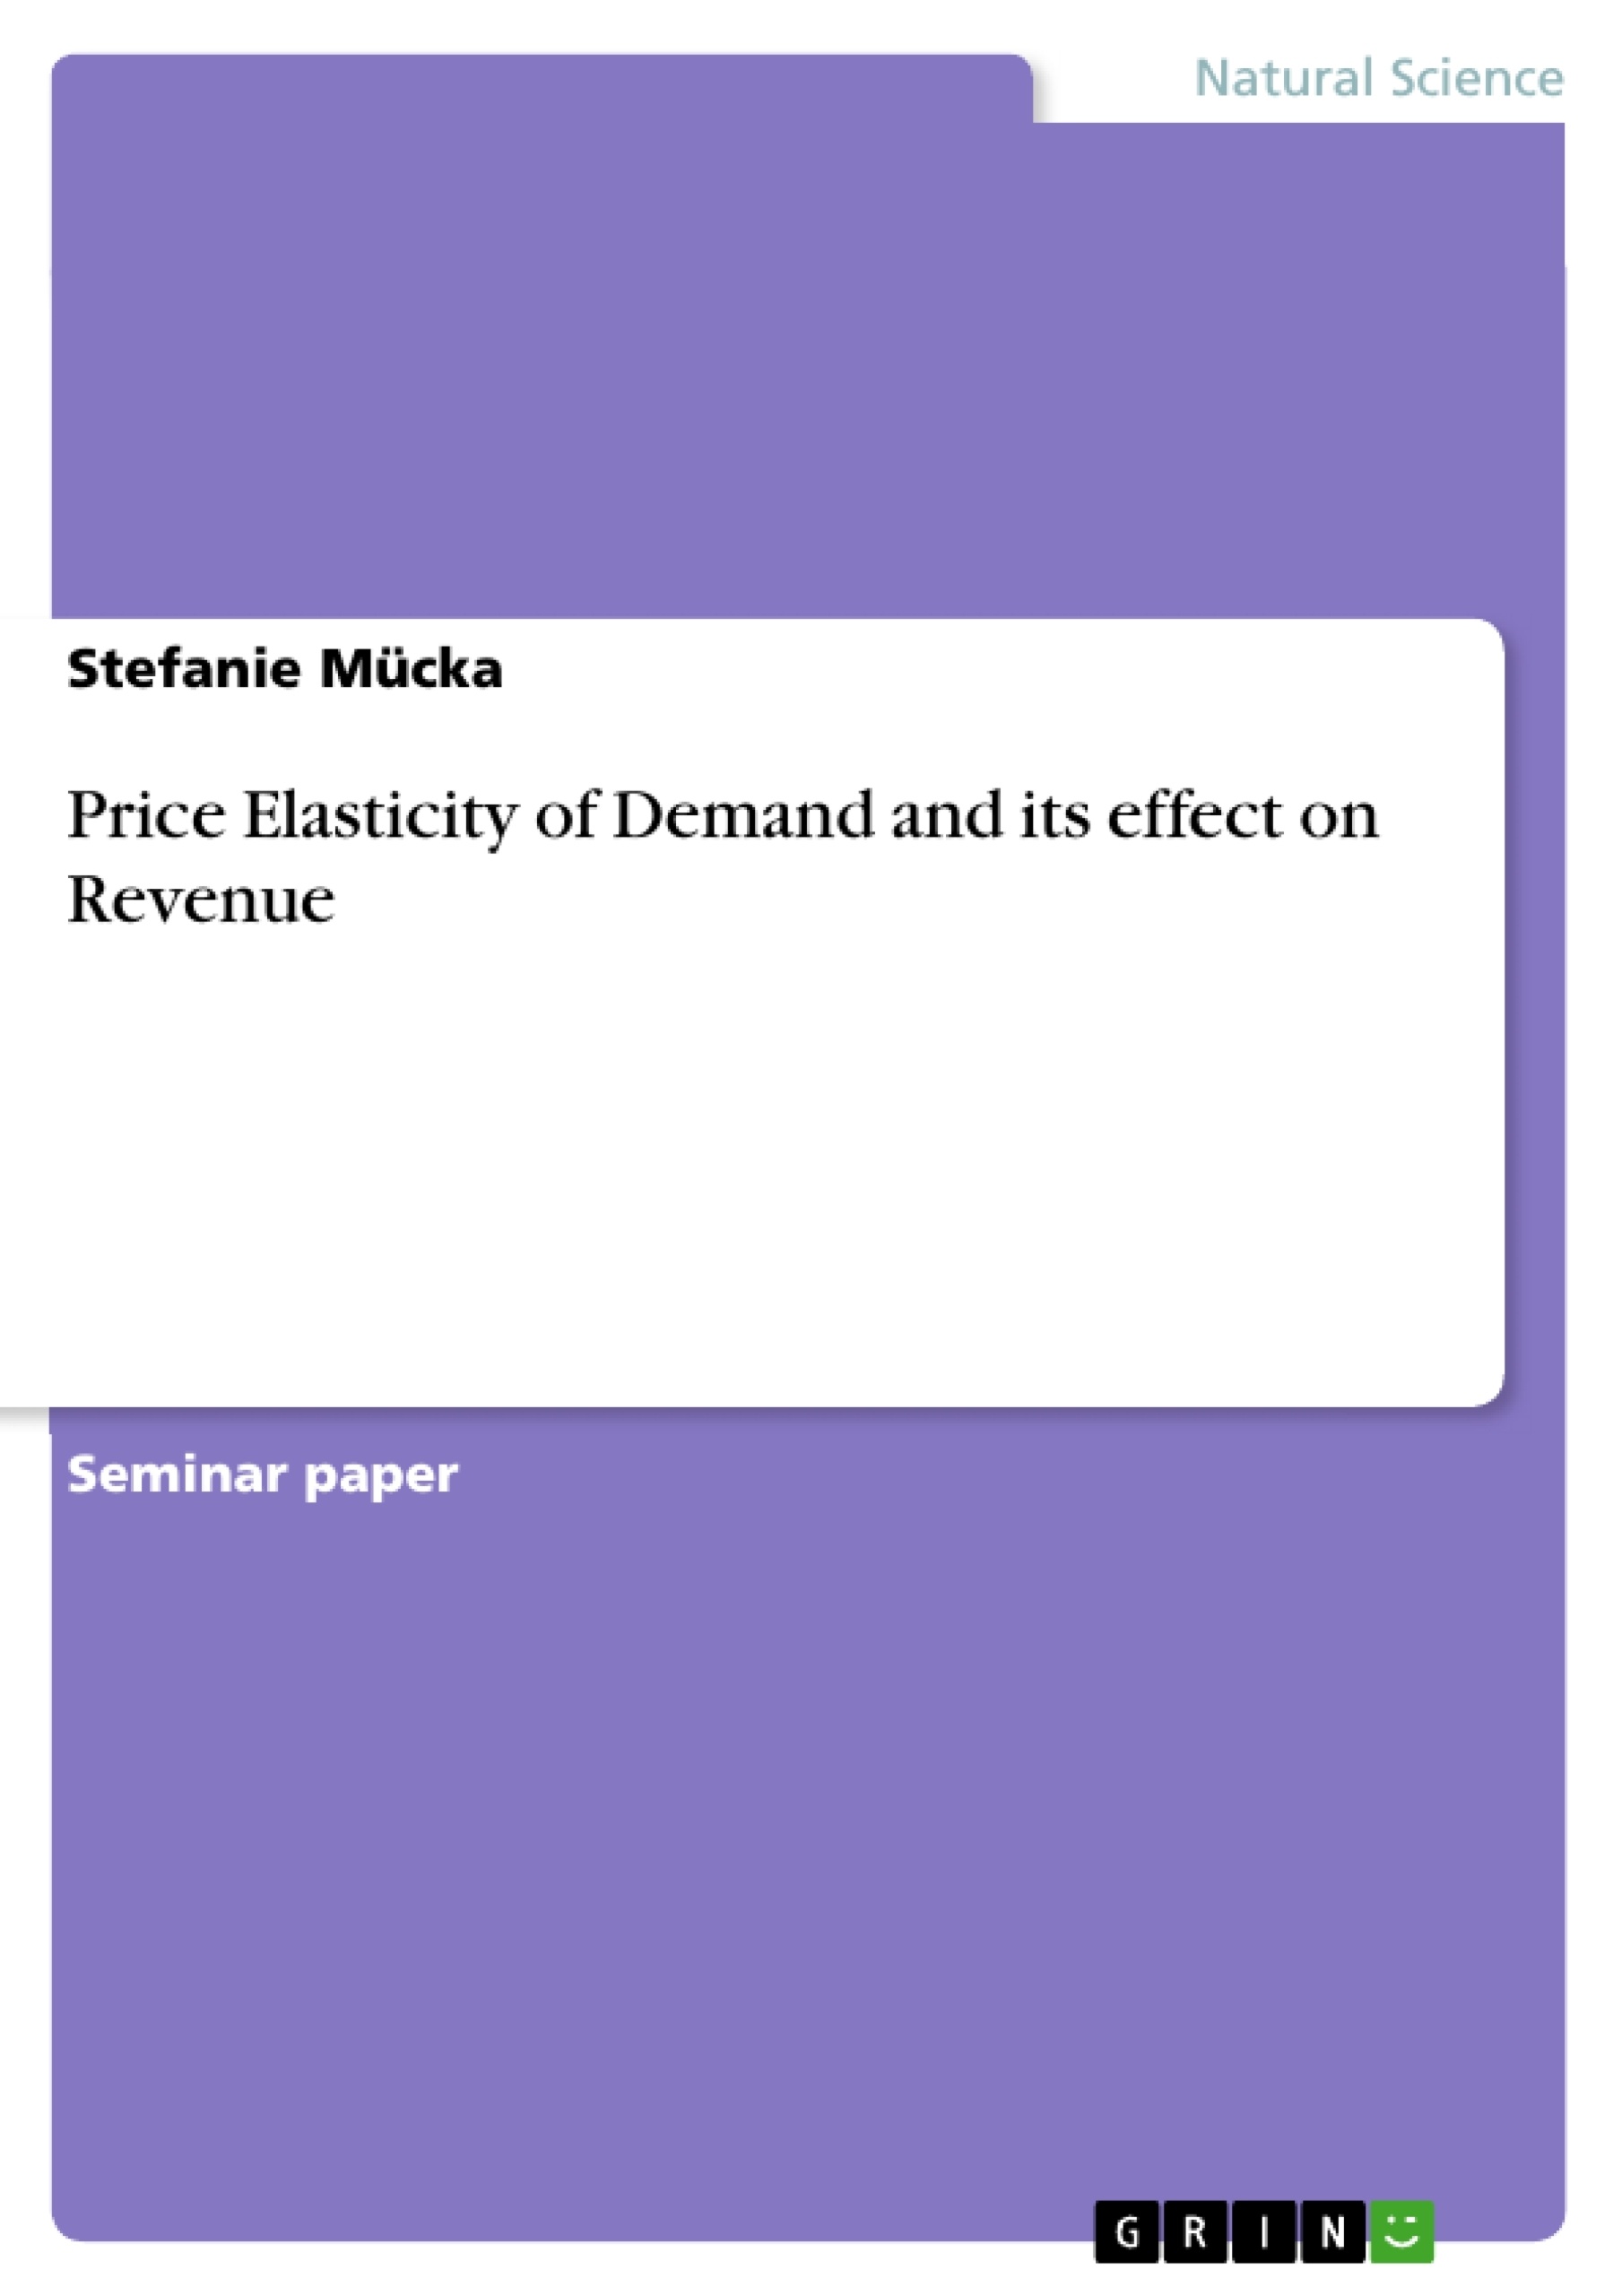 Título: Price Elasticity of Demand and its effect on Revenue